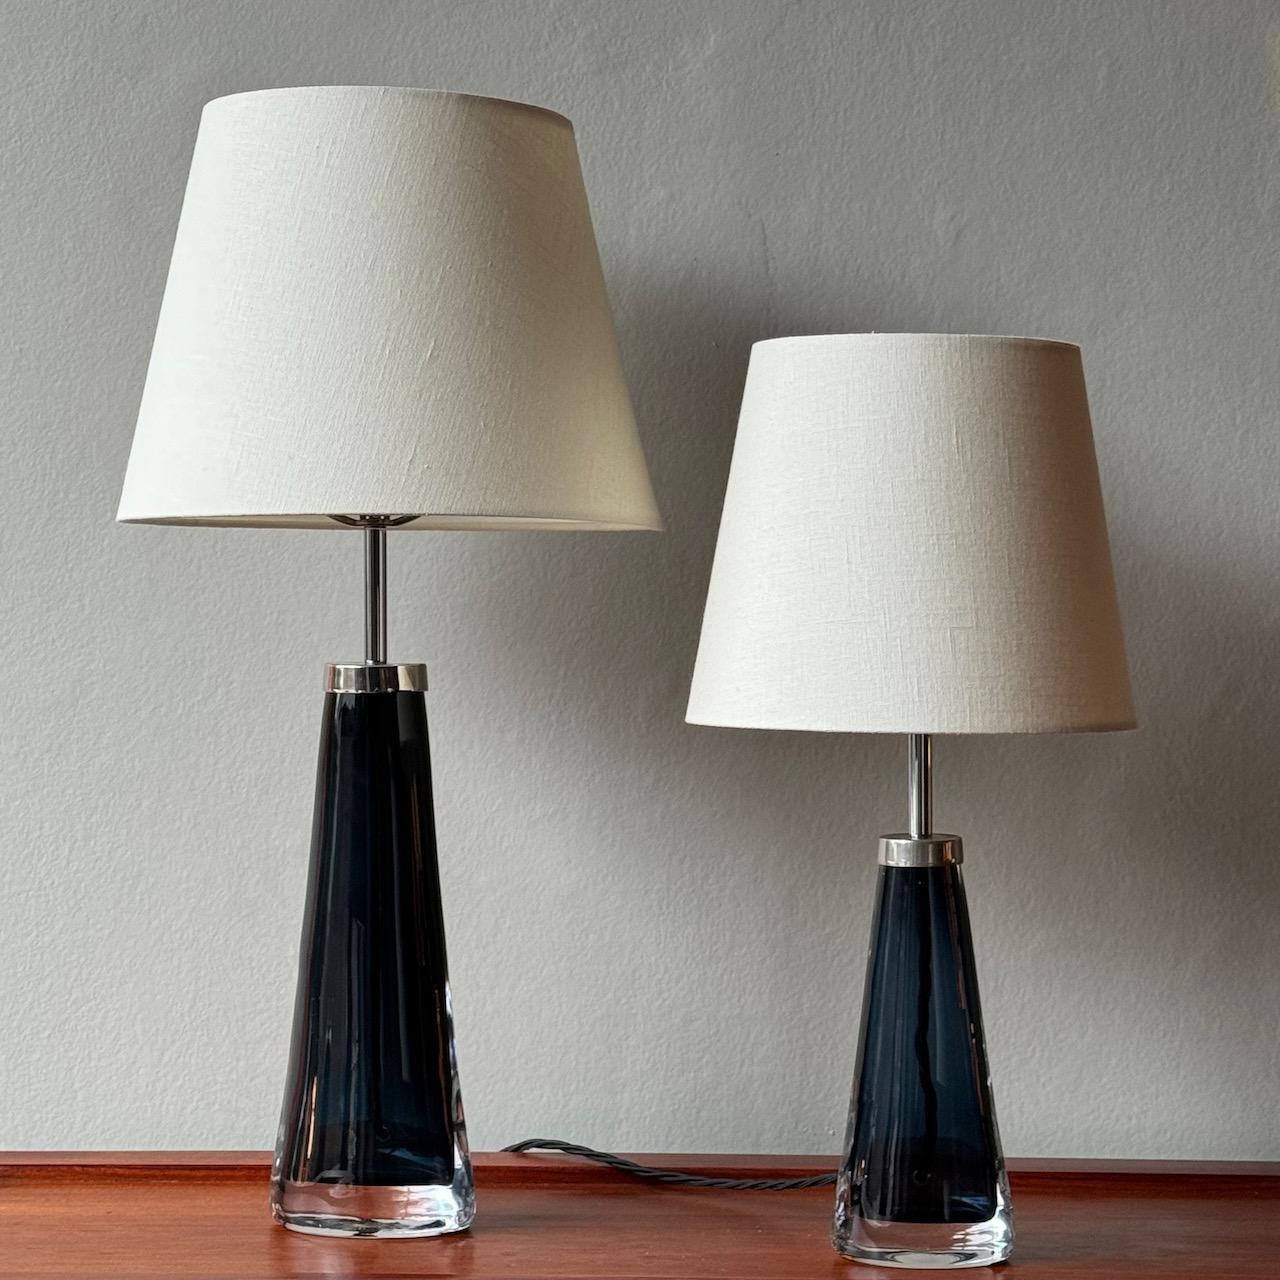 A Pair of Glass Table Lamps, Carl Fagerlund, Orrefors Sweden, 1960s For Sale 7